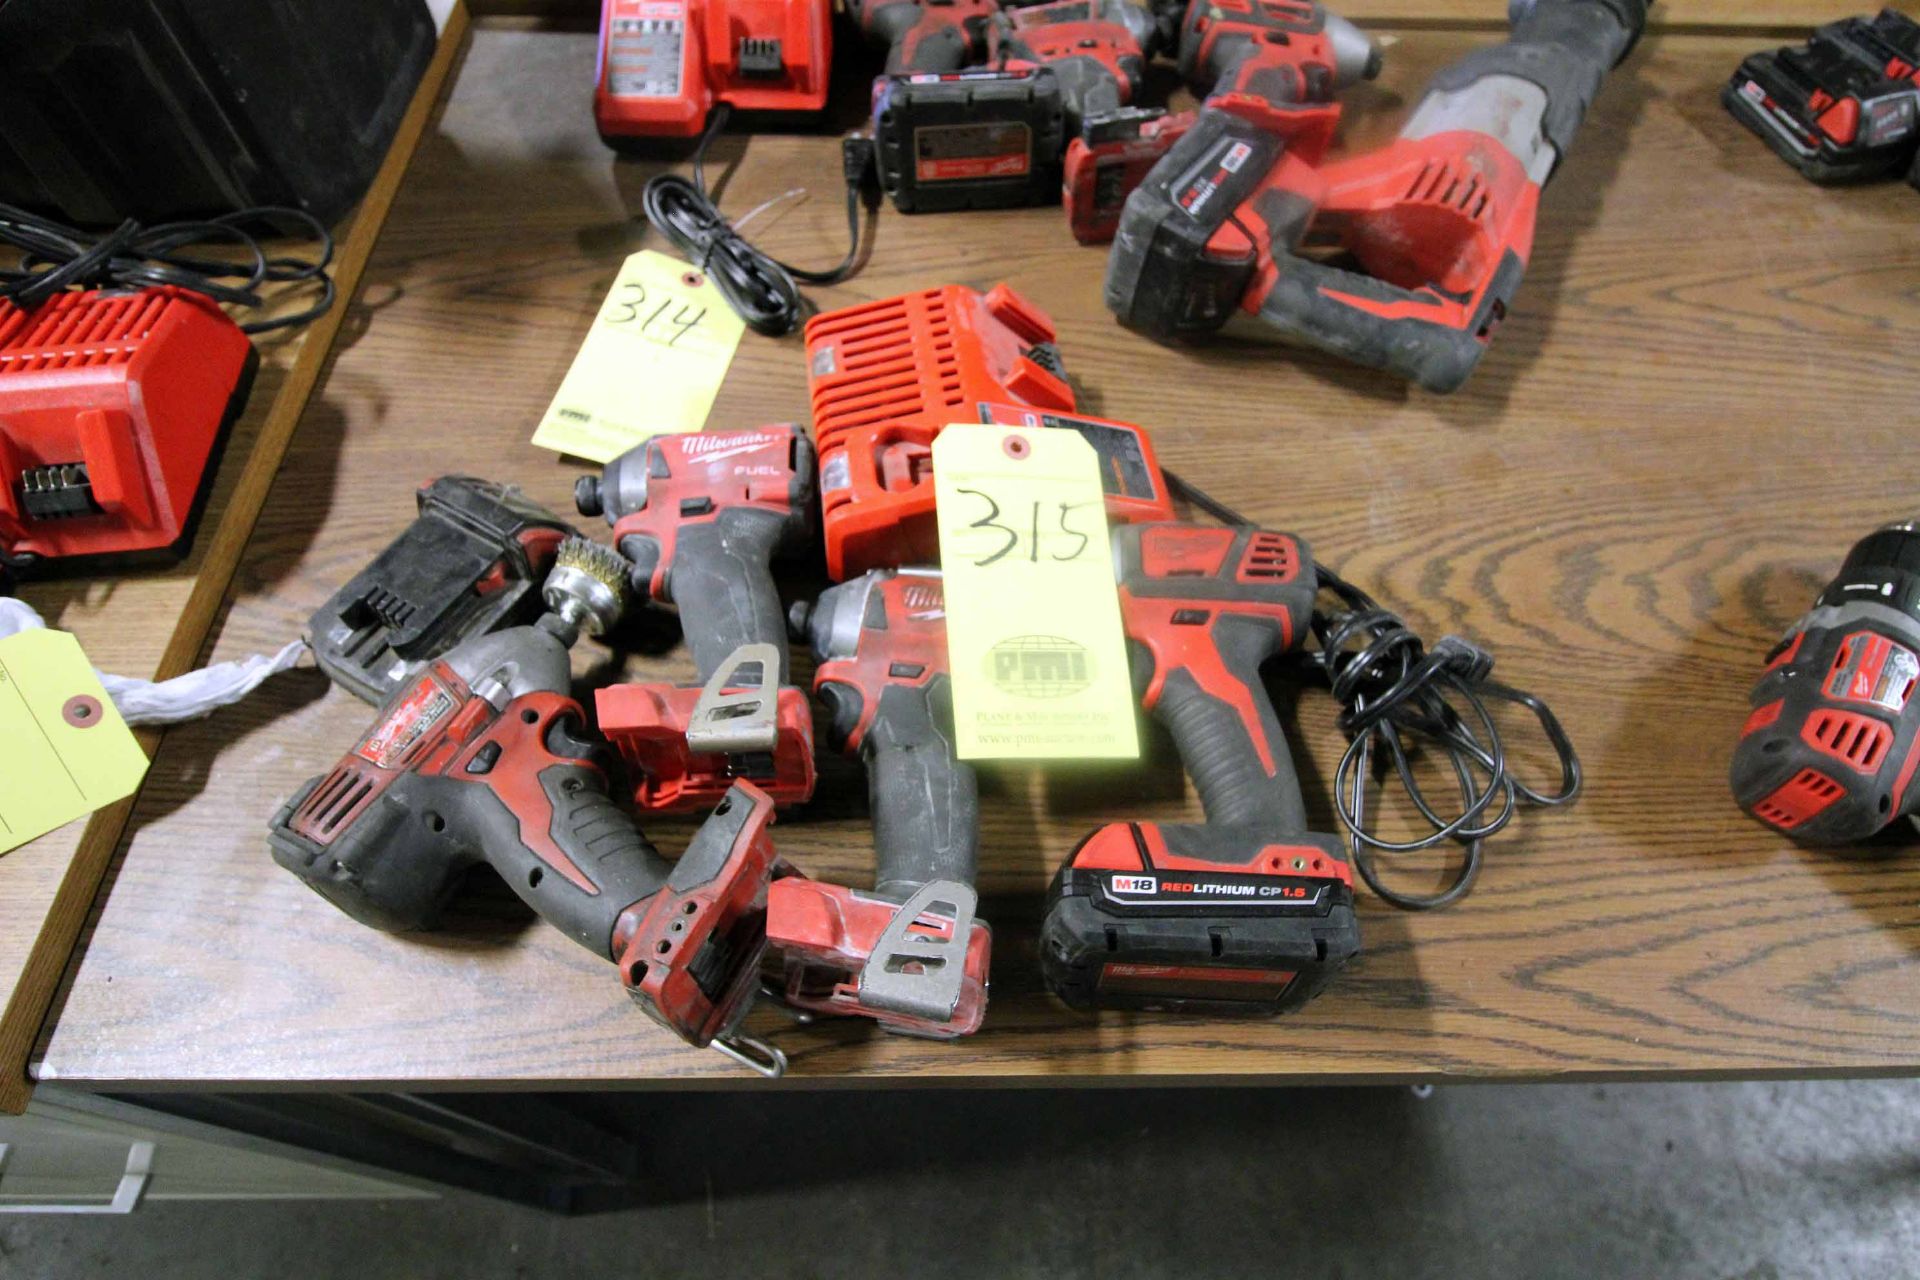 LOT OF MILWAUKEE CORDLESS TOOLING: (4) impact drills, (2) batteries & (1) charger